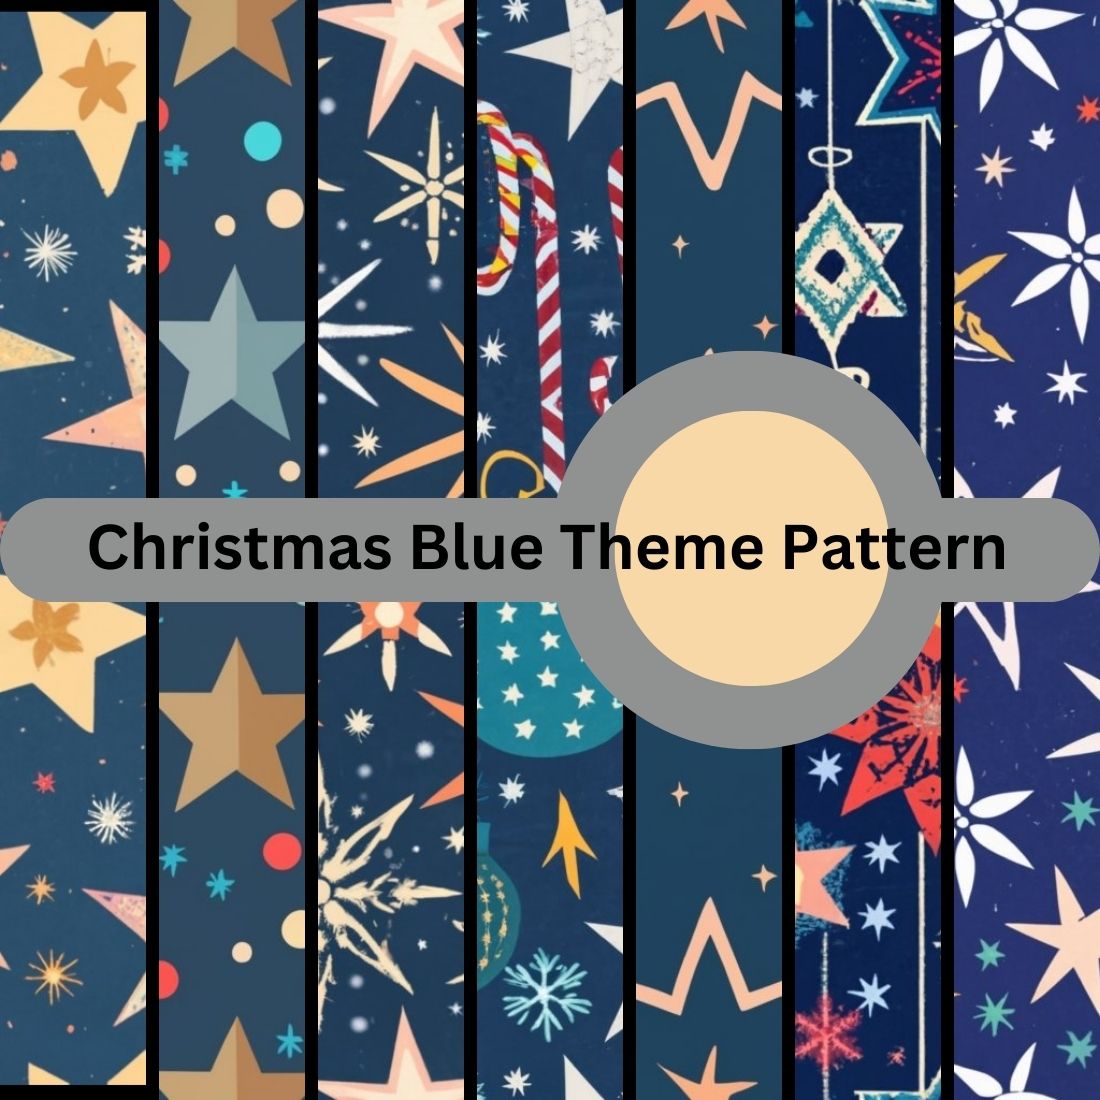 Christmas Blue Theme Texture seamless Pattern cover image.